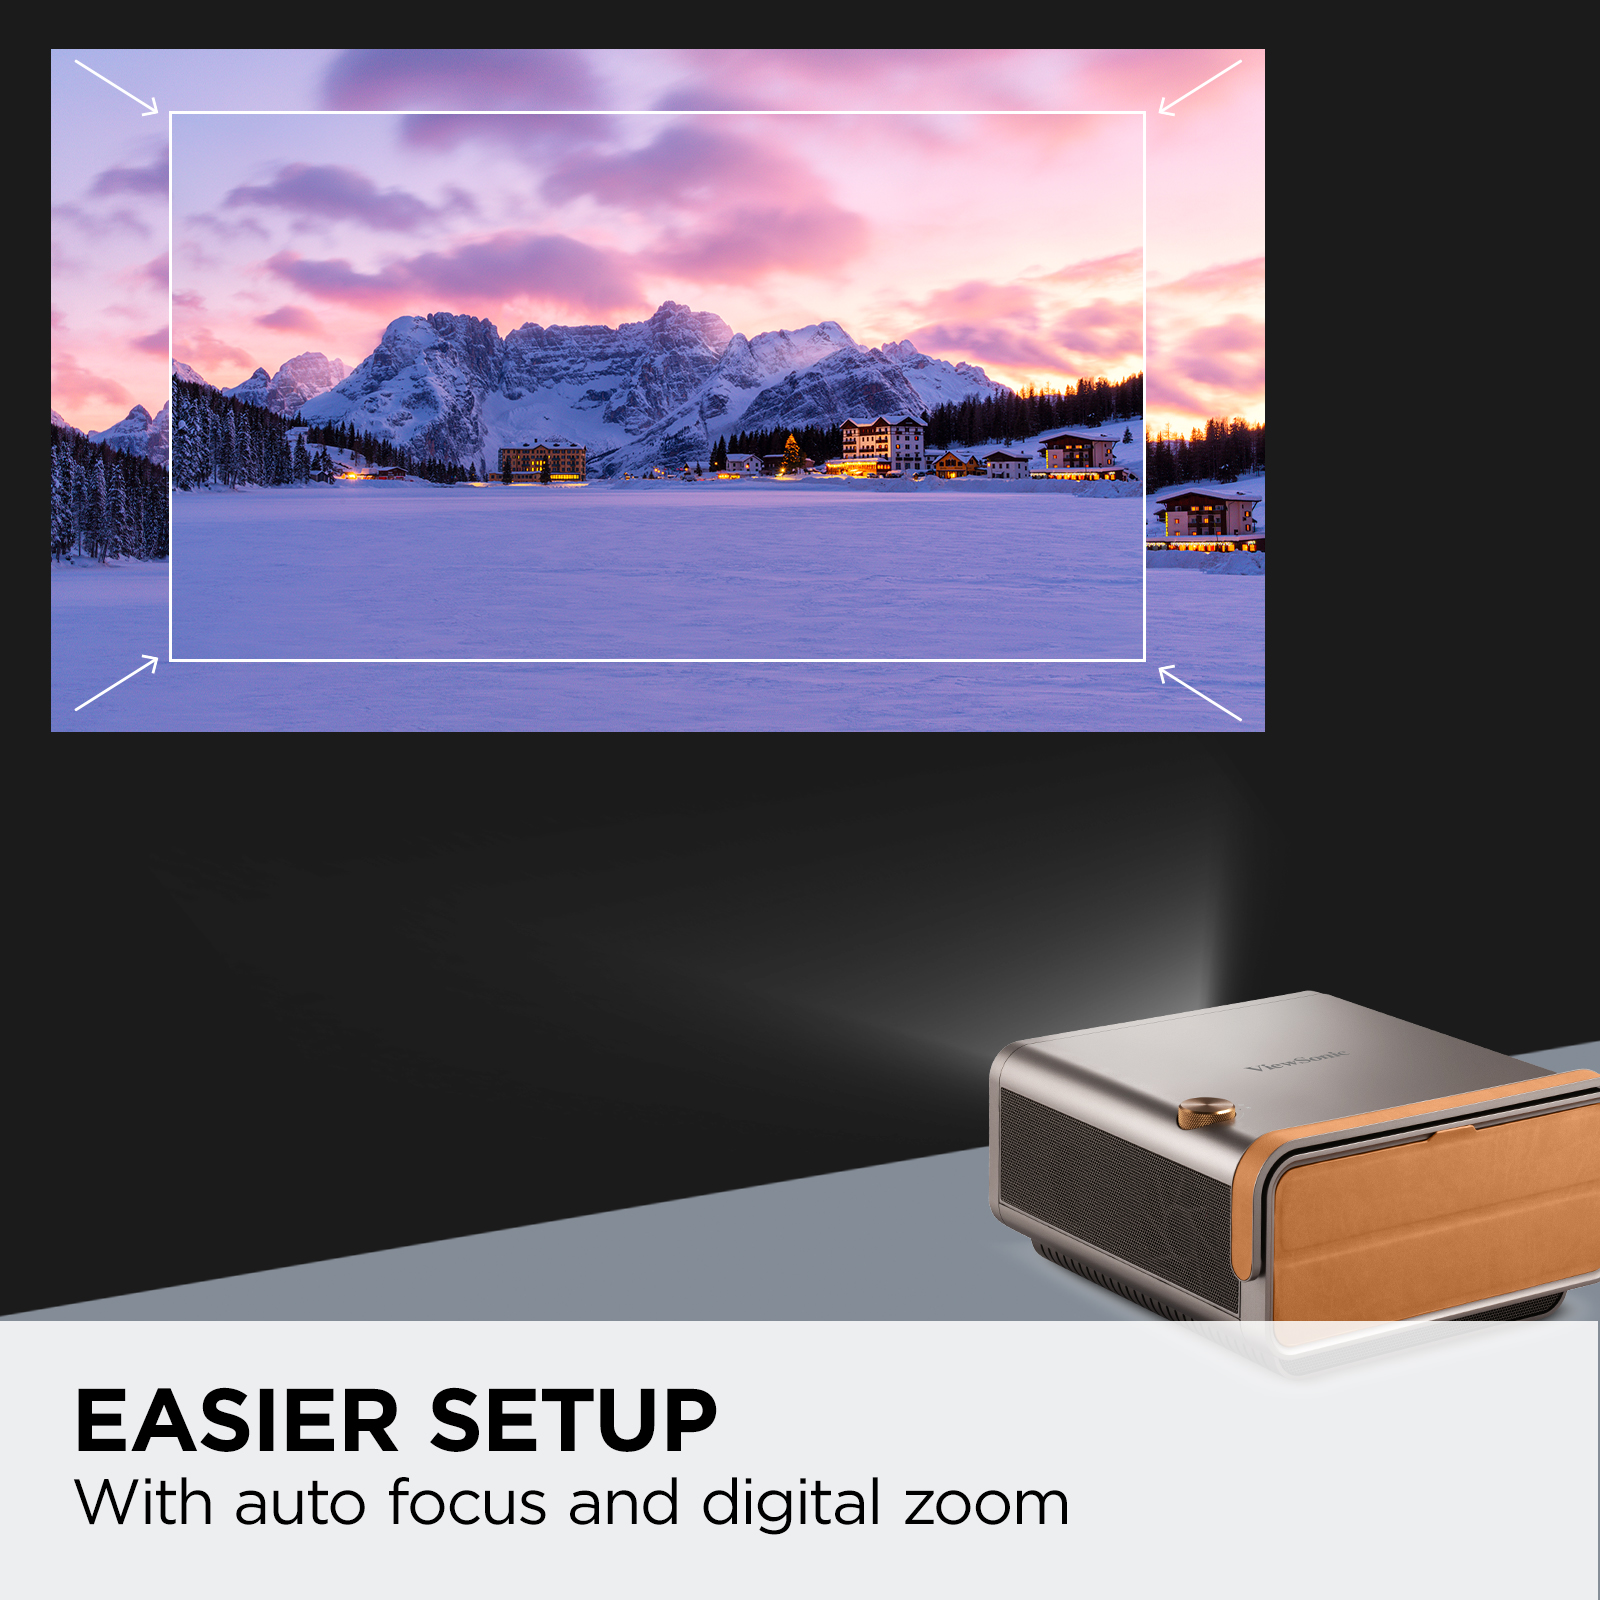 ViewSonic X11-4K True 4K UHD Short Throw LED Projector with H/V Keystone, Corner Adjustments, WiFi, USB C Connectivity, Cinematic SuperColor for Smart Home Theater - image 3 of 8